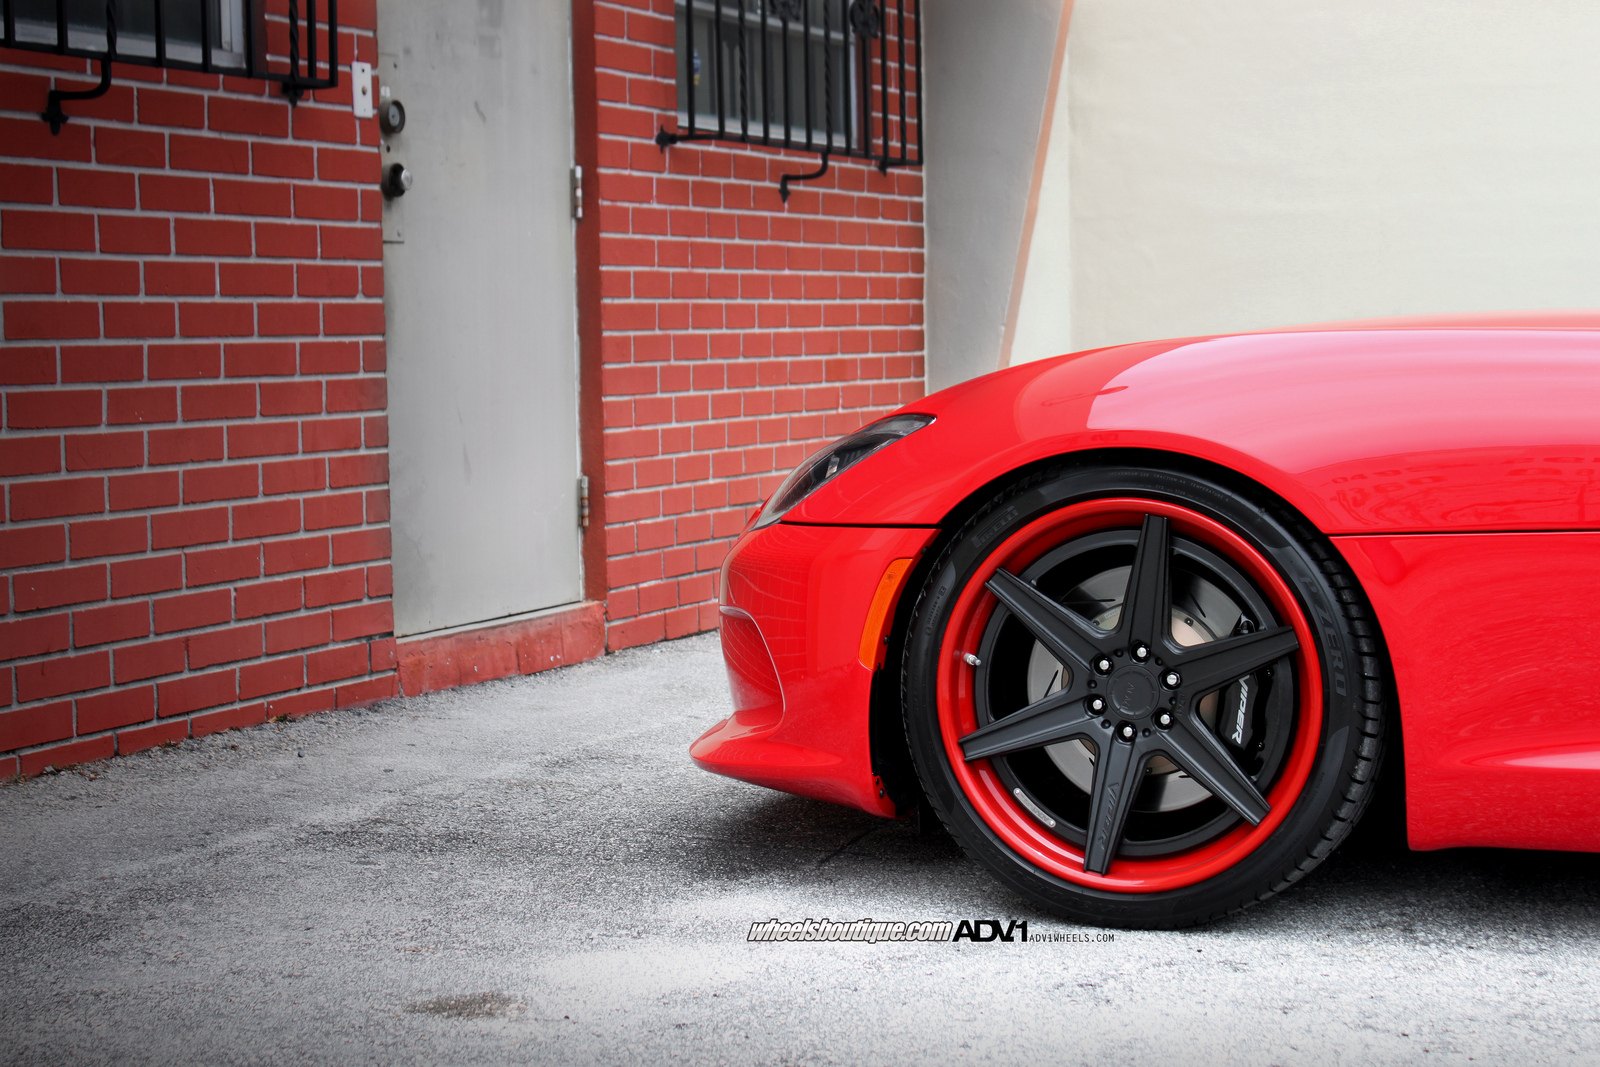 Red Dodge Viper on Pirelli Tires - Photo by ADV.1